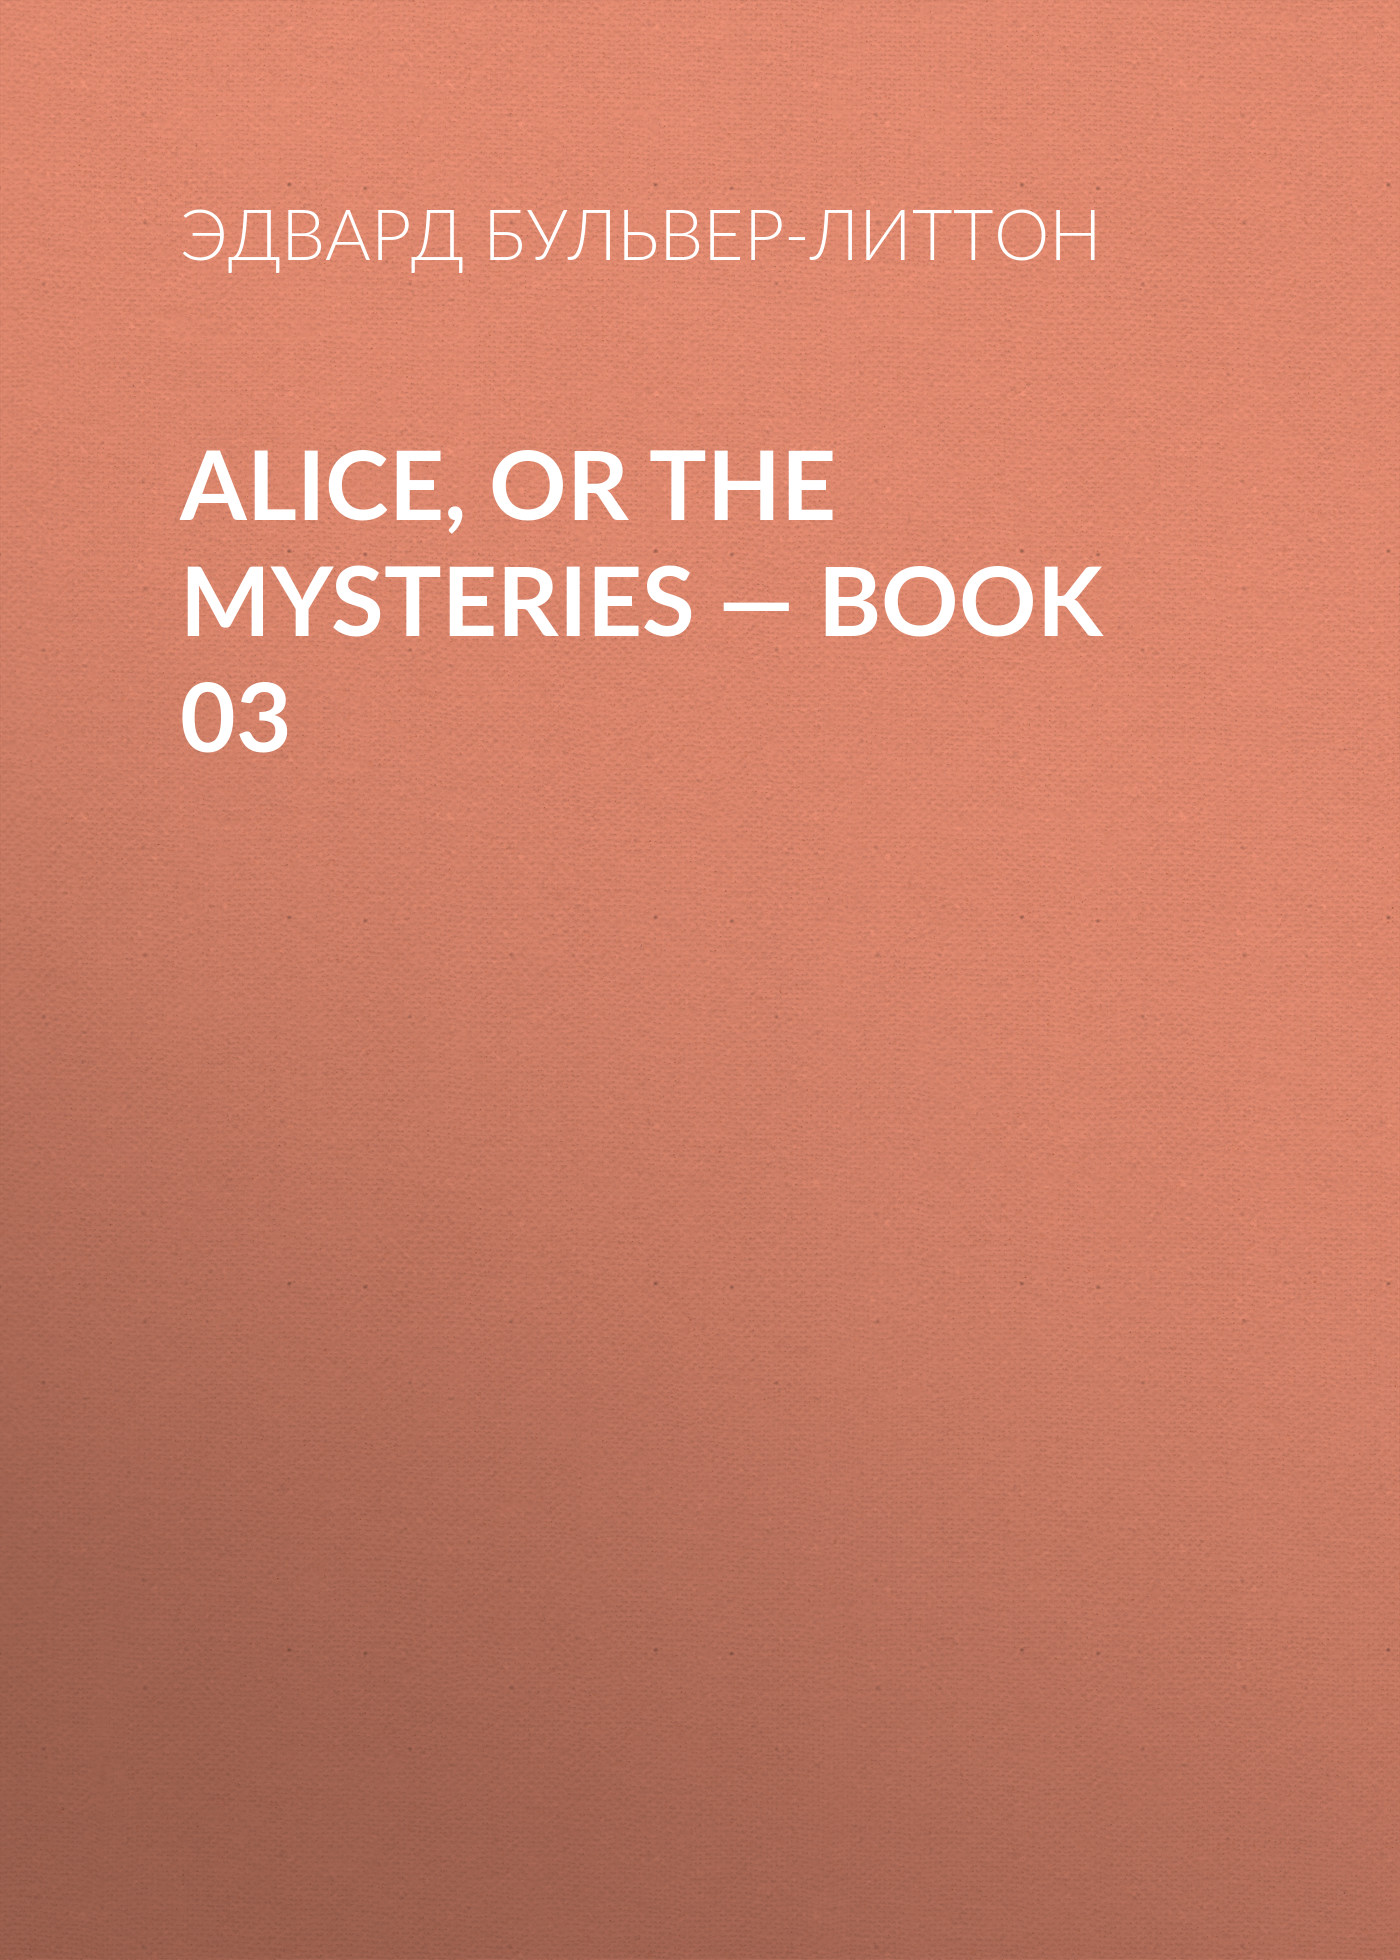 Alice, or the Mysteries— Book 03